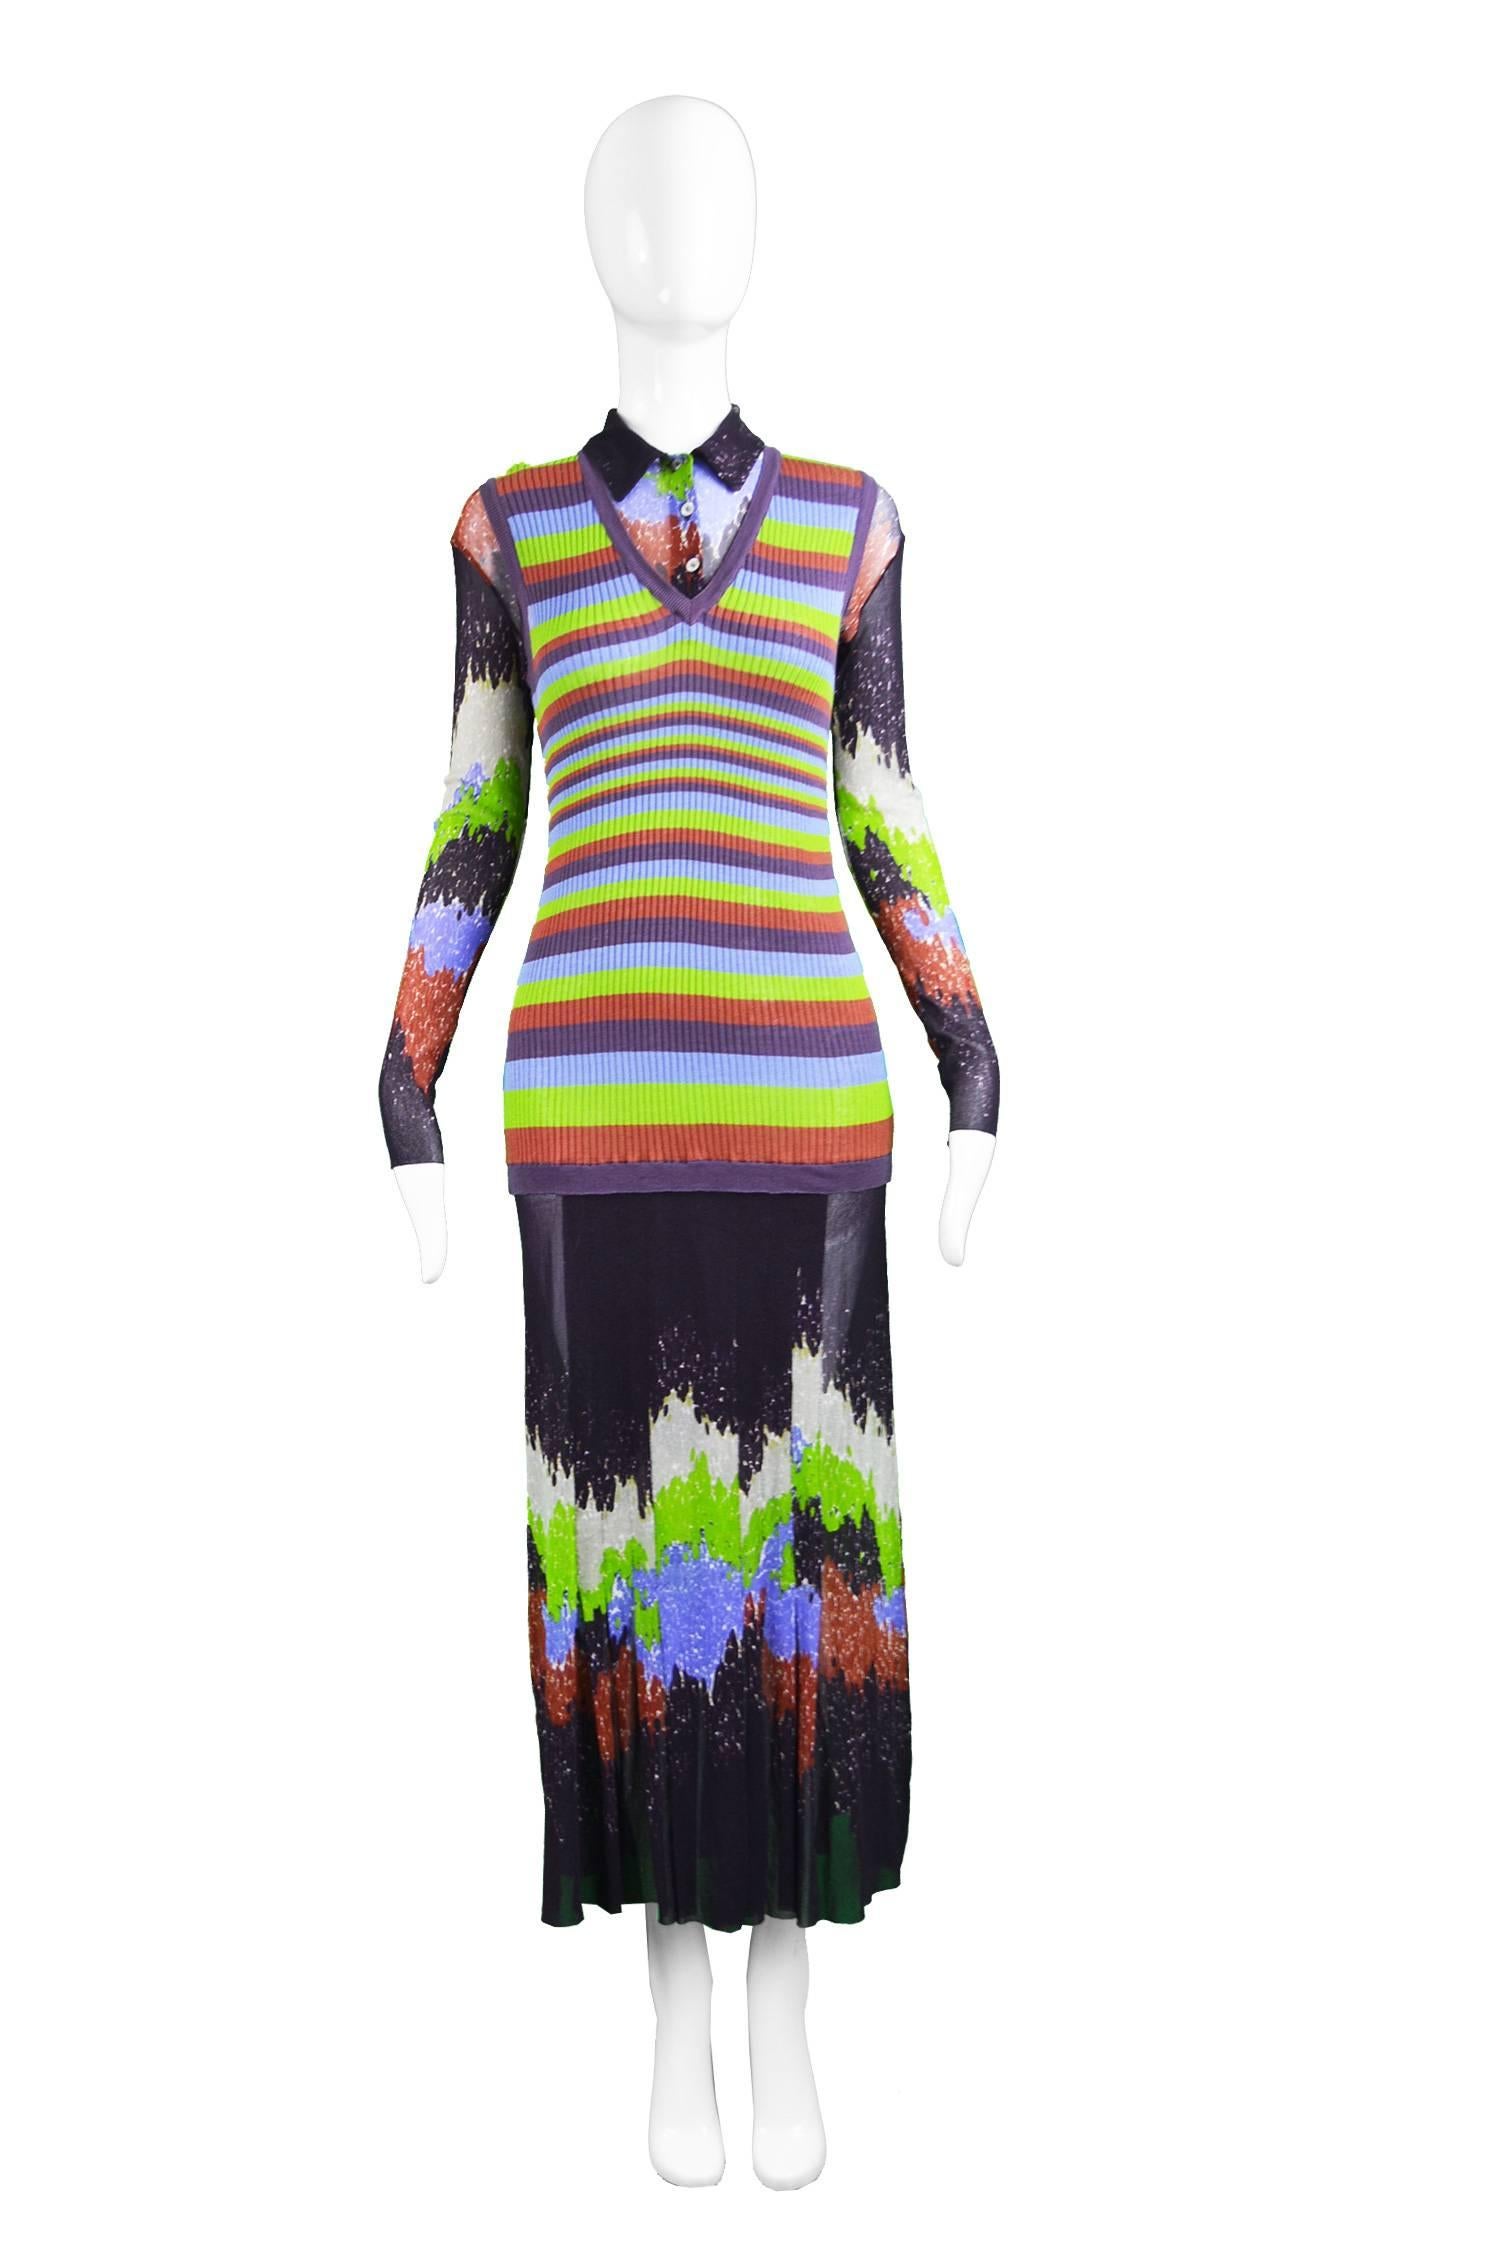 A stunning vintage maxi dress by iconic French designer, Jean Paul Gaultier for his Maille line c. 1990s. Dual layered with an attached sweater vest / mini dress style bodice which gives a 70s style look and a long maxi skirt which is pleated at the